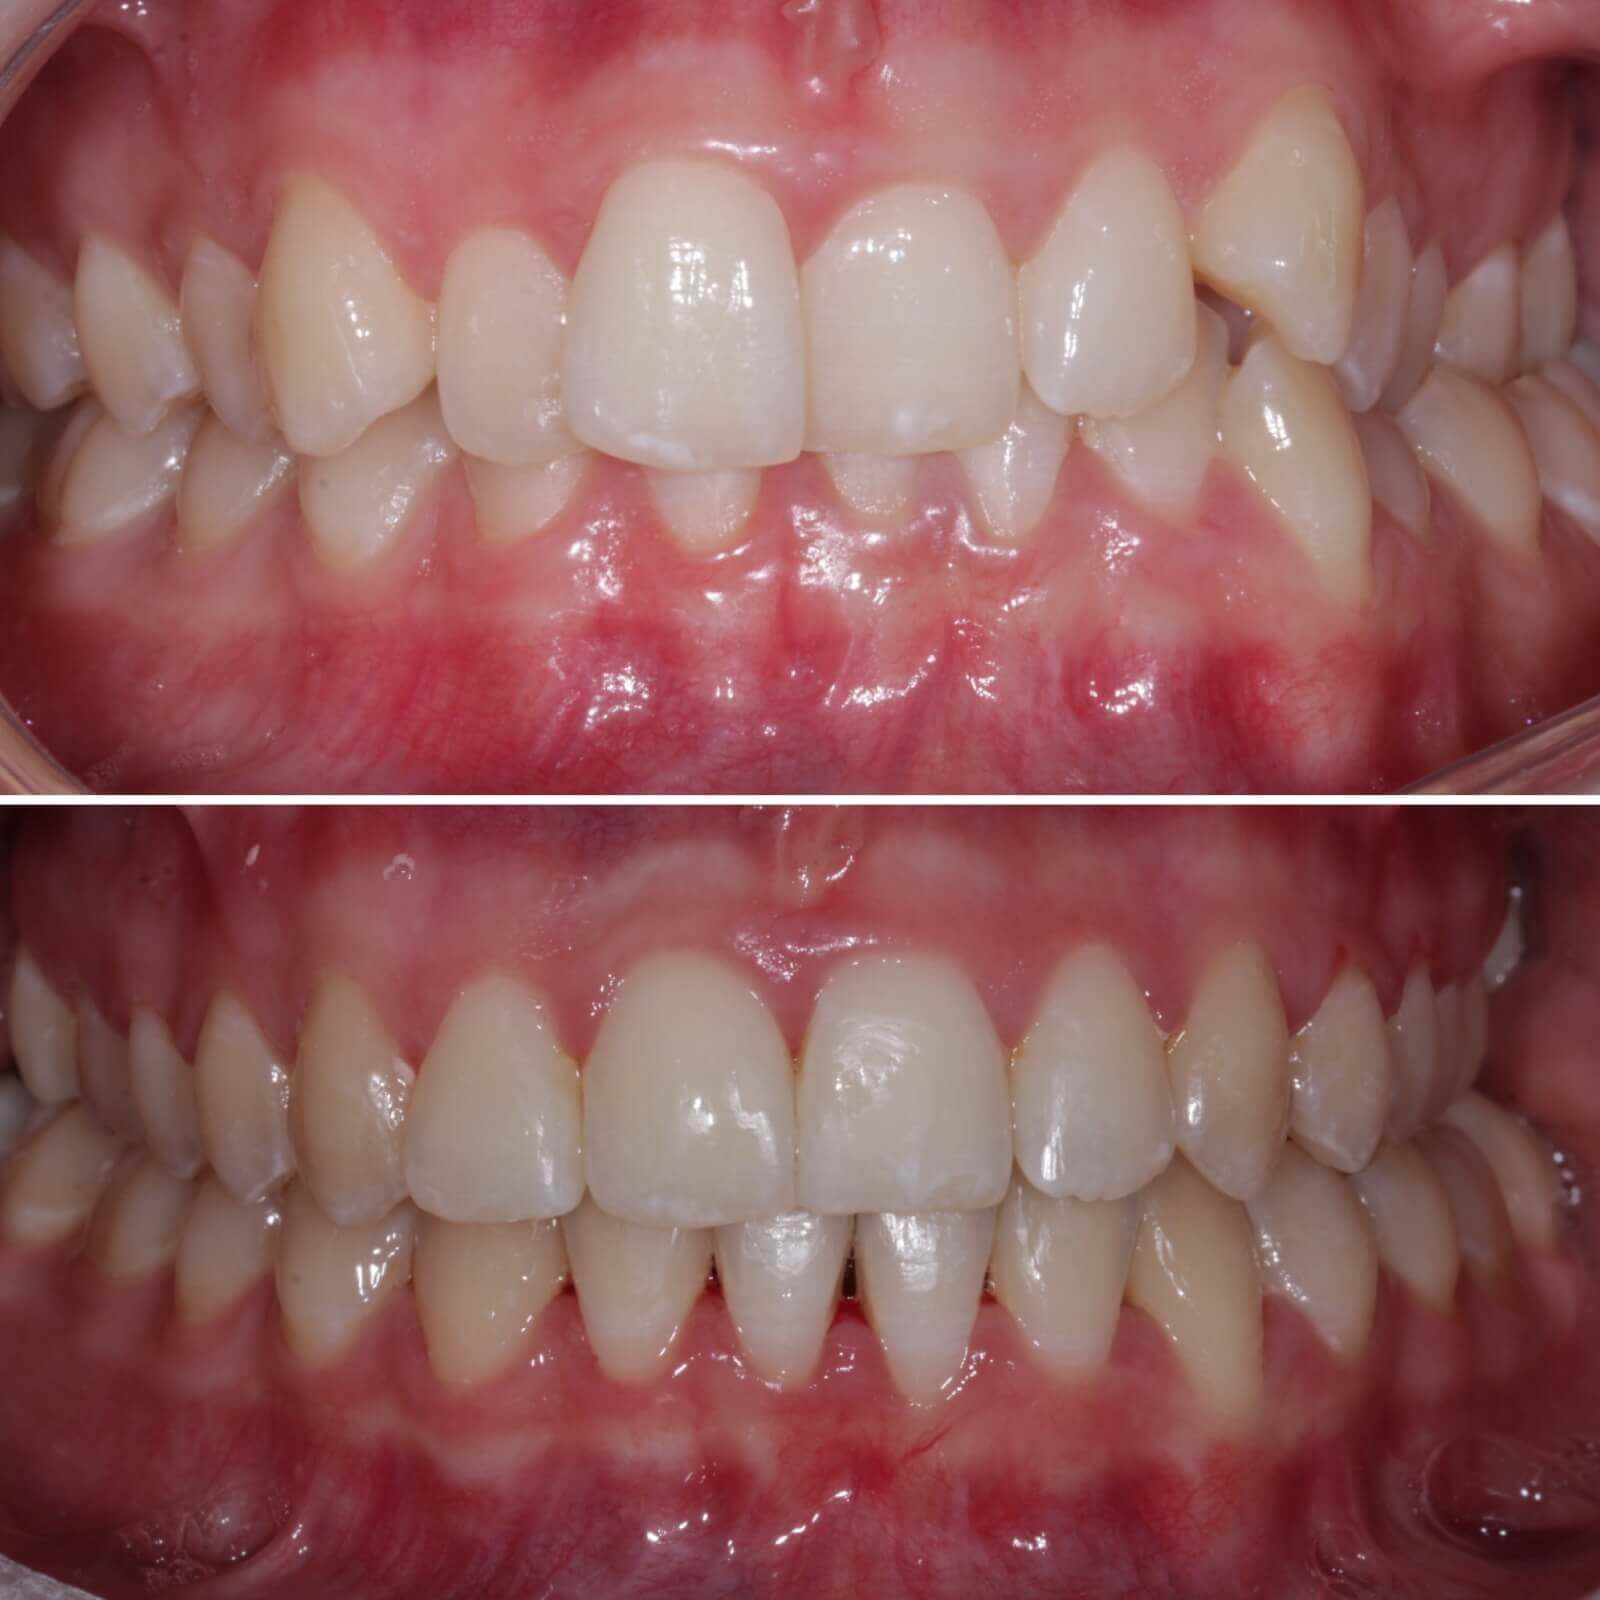 Fast braces - before and after